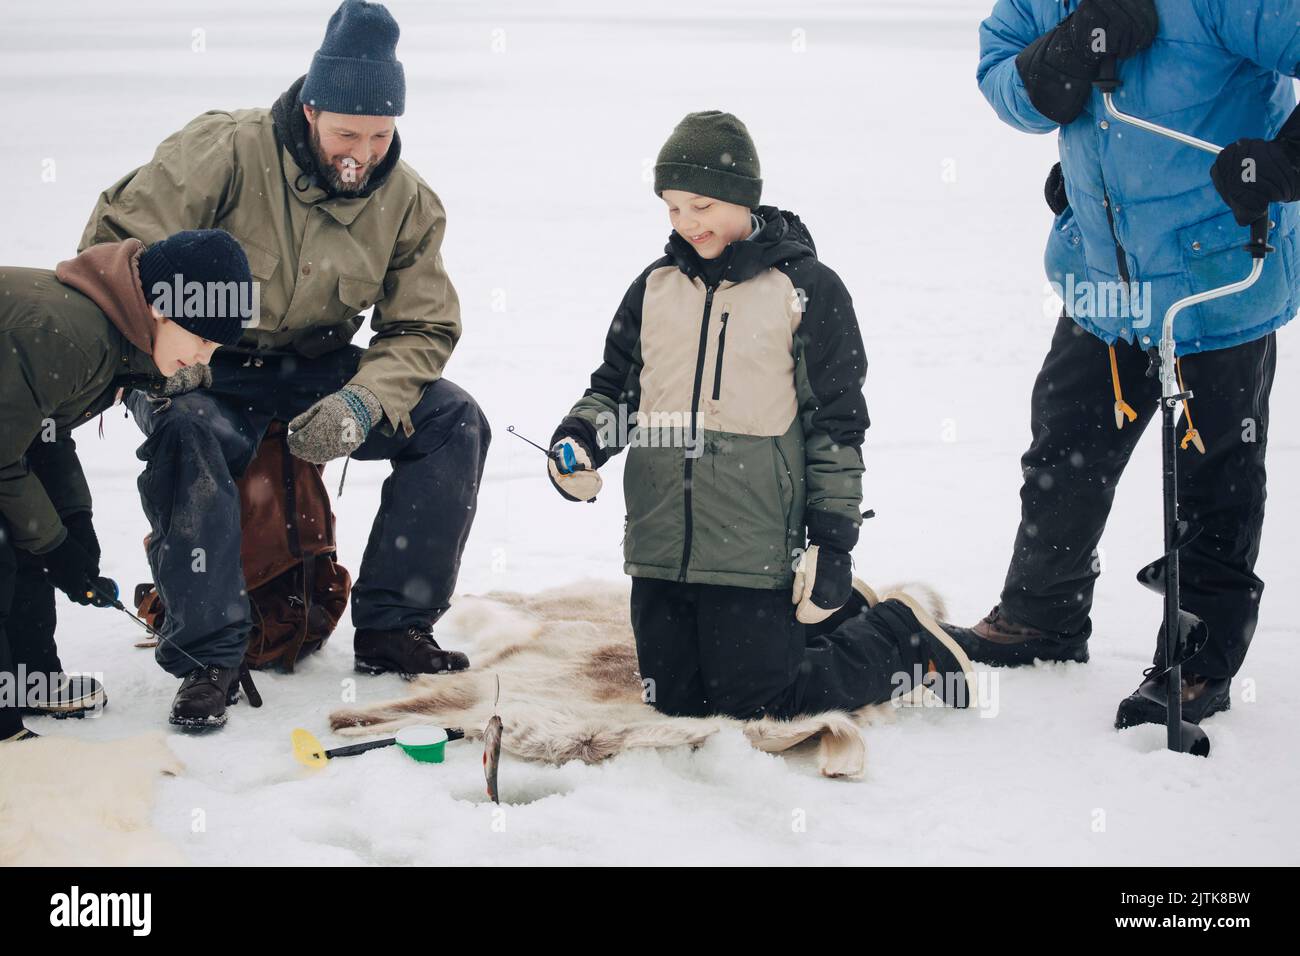 Happy boy kneeling by men and friend while fishing at frozen lake during winter Stock Photo